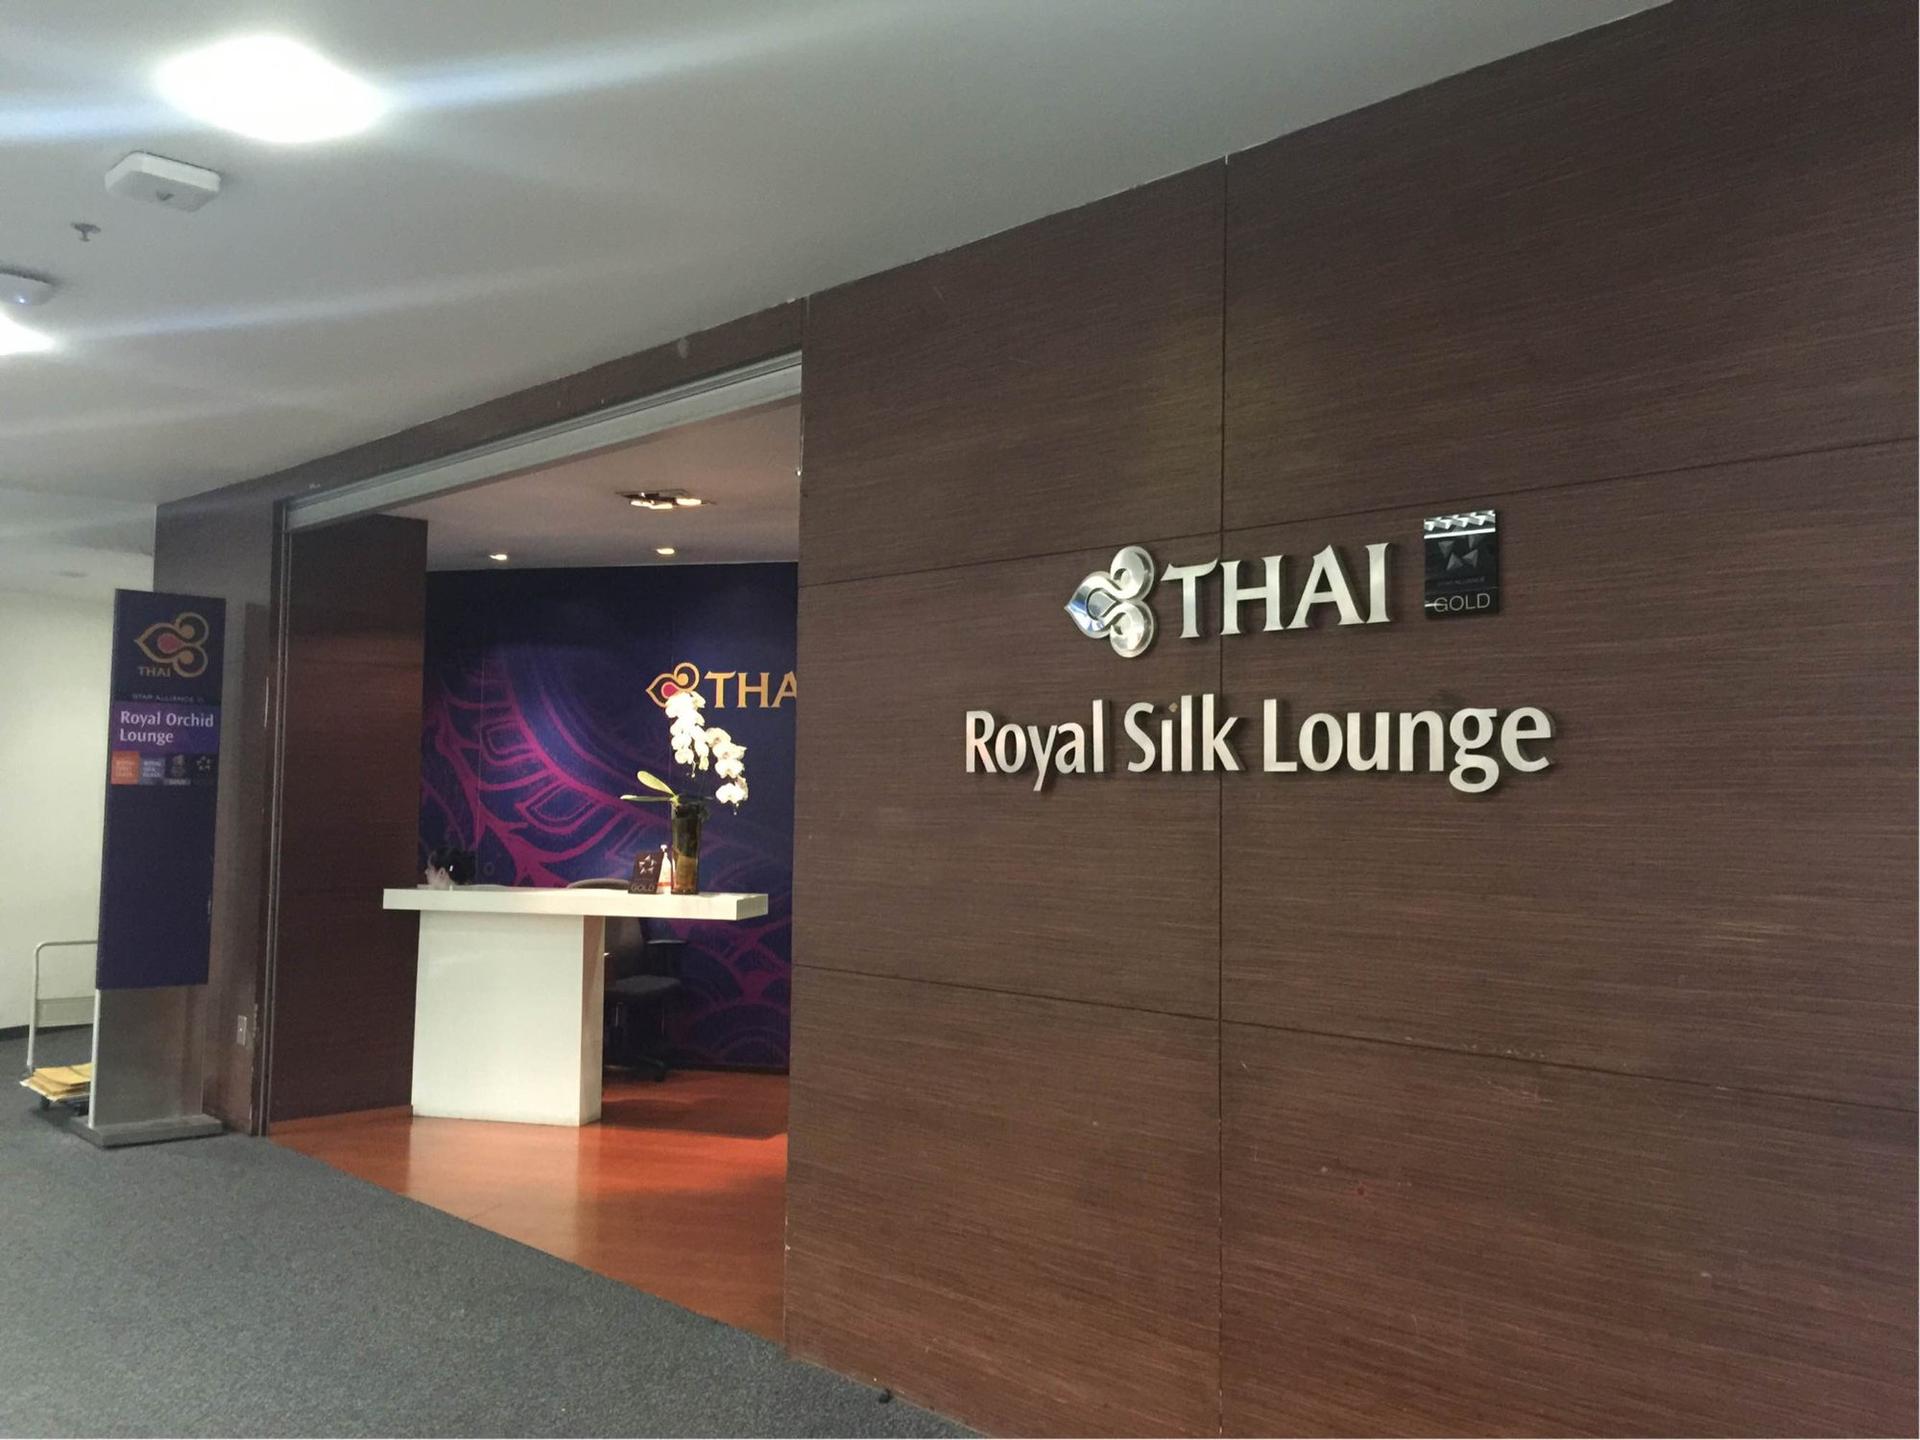 Thai Airways Royal Orchid Lounge image 6 of 22